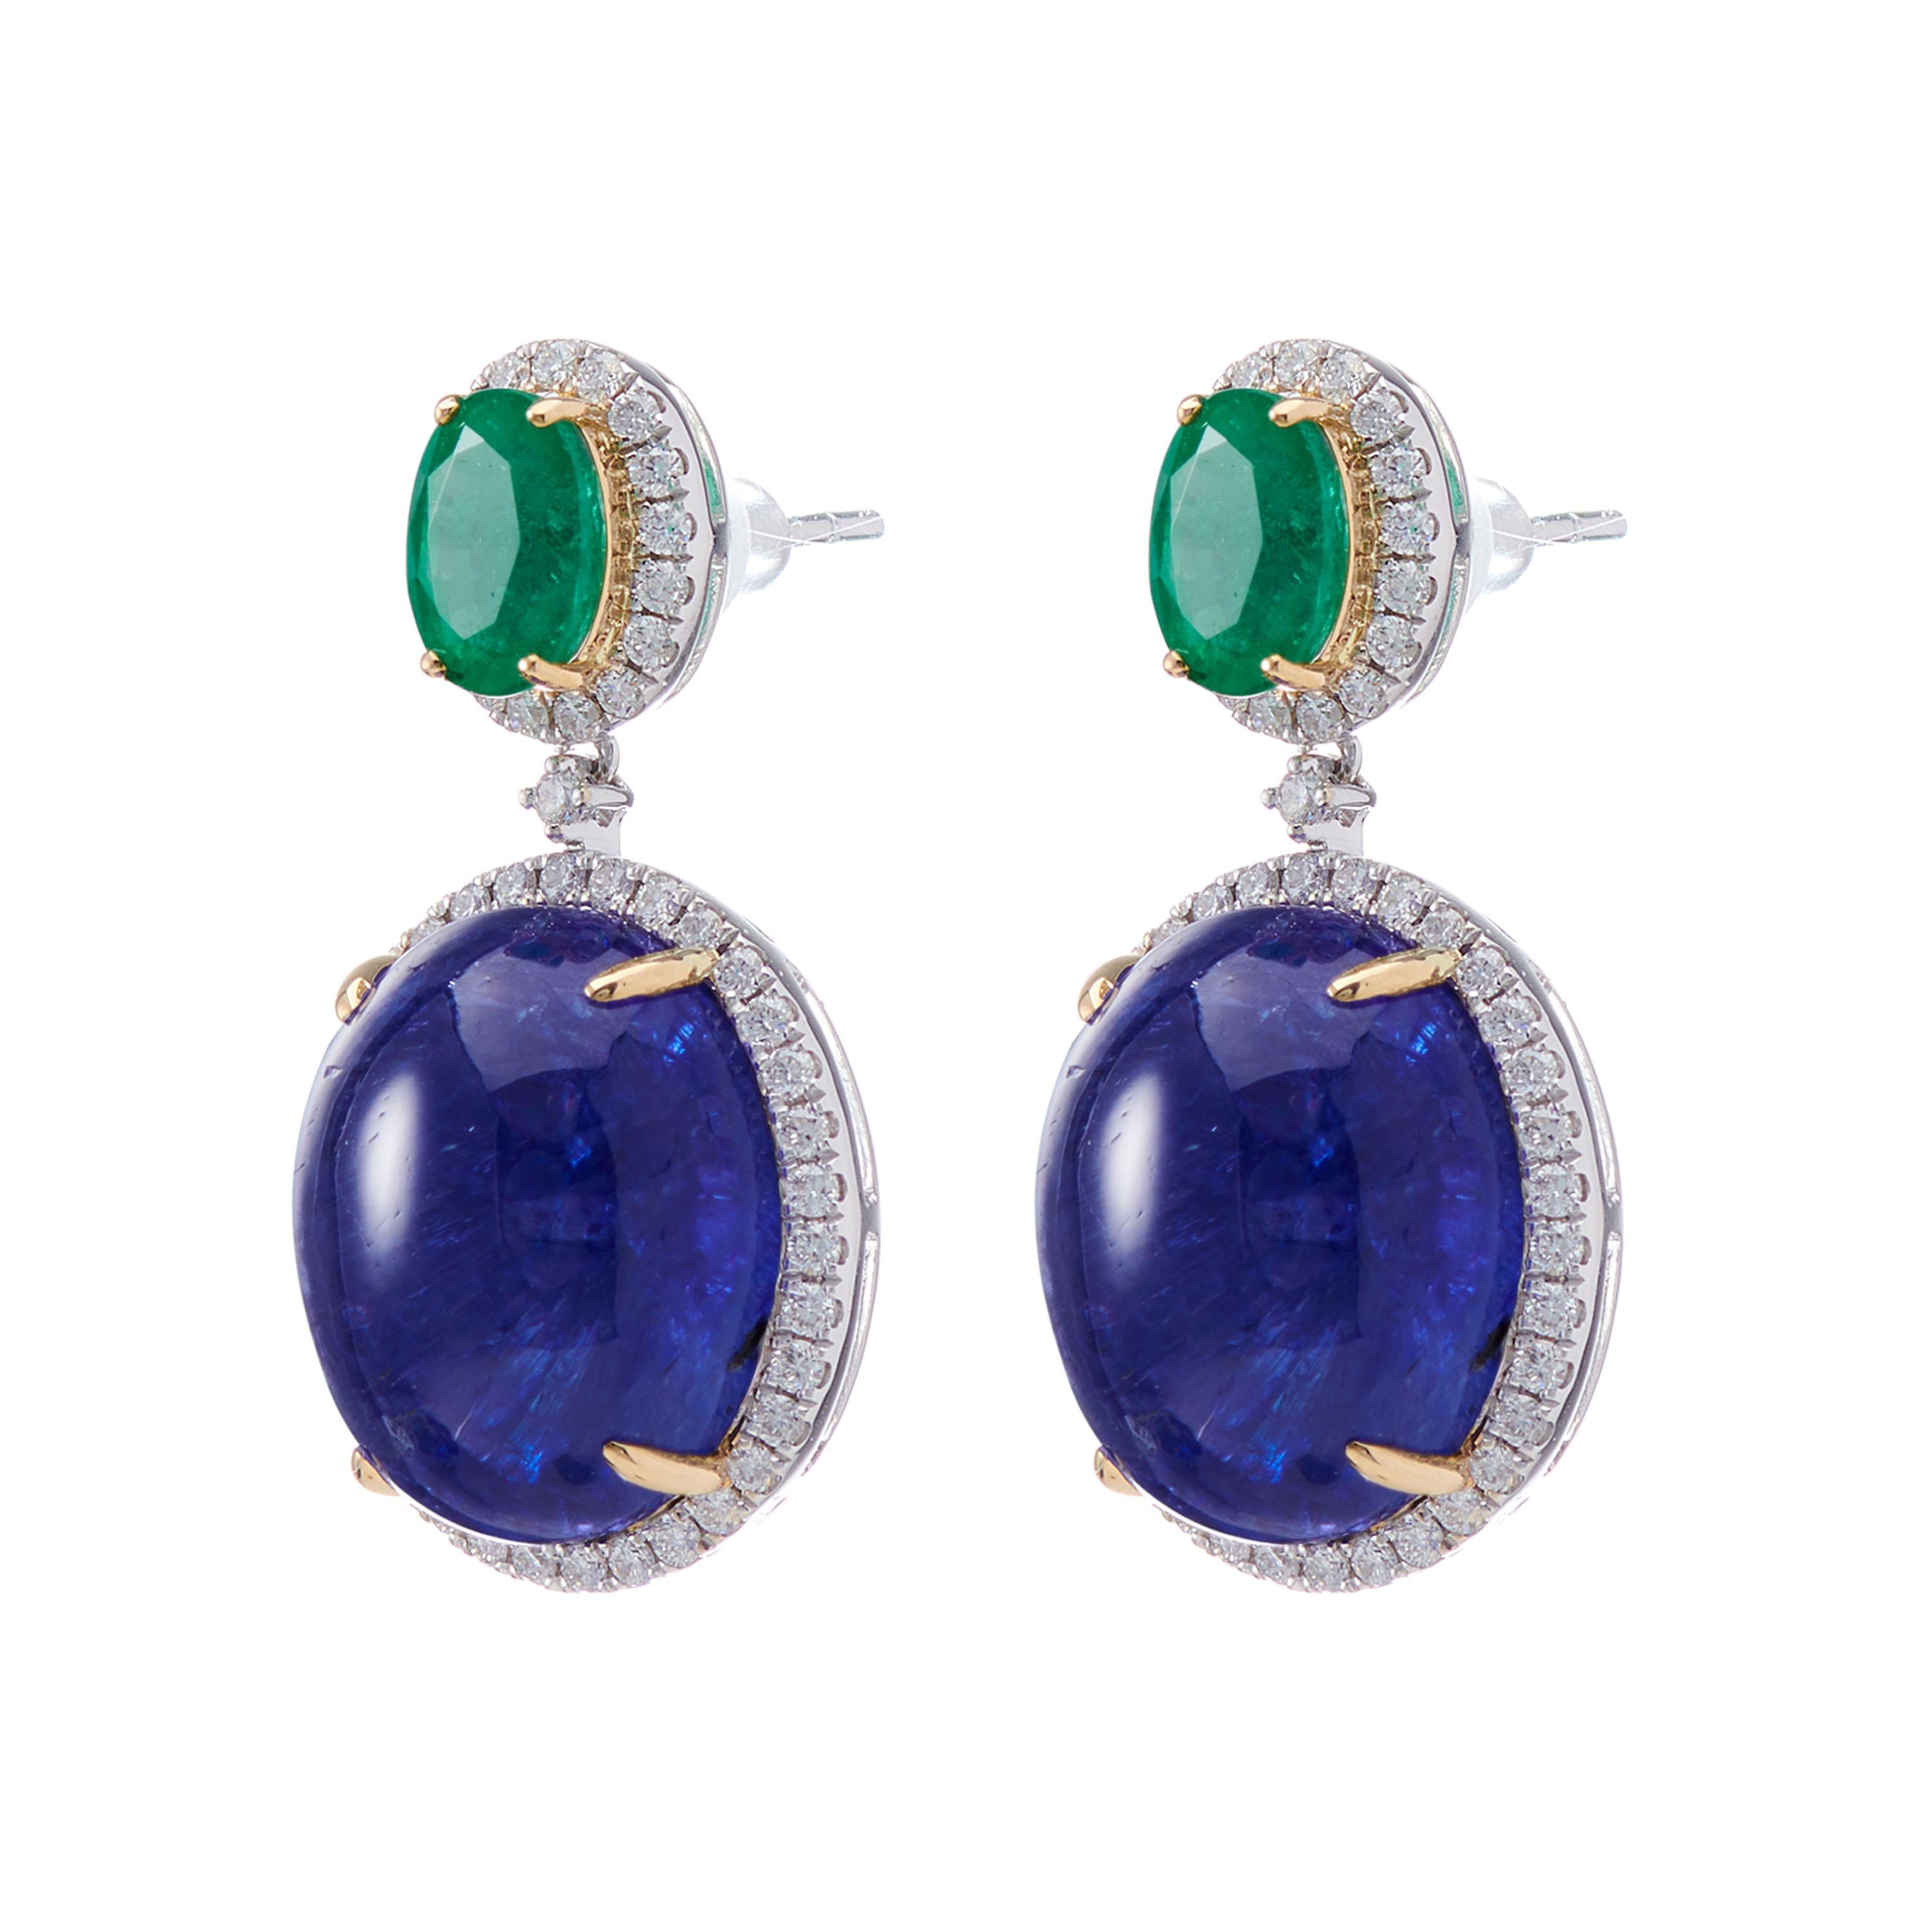 Description:
MADE-TO-ORDER – the stone and metal weights may differ from the listing. Please note, items made to order can take up to 8 weeks.

A pair of limited-edition drop earrings of which blue and green unite as a fantastic combination of